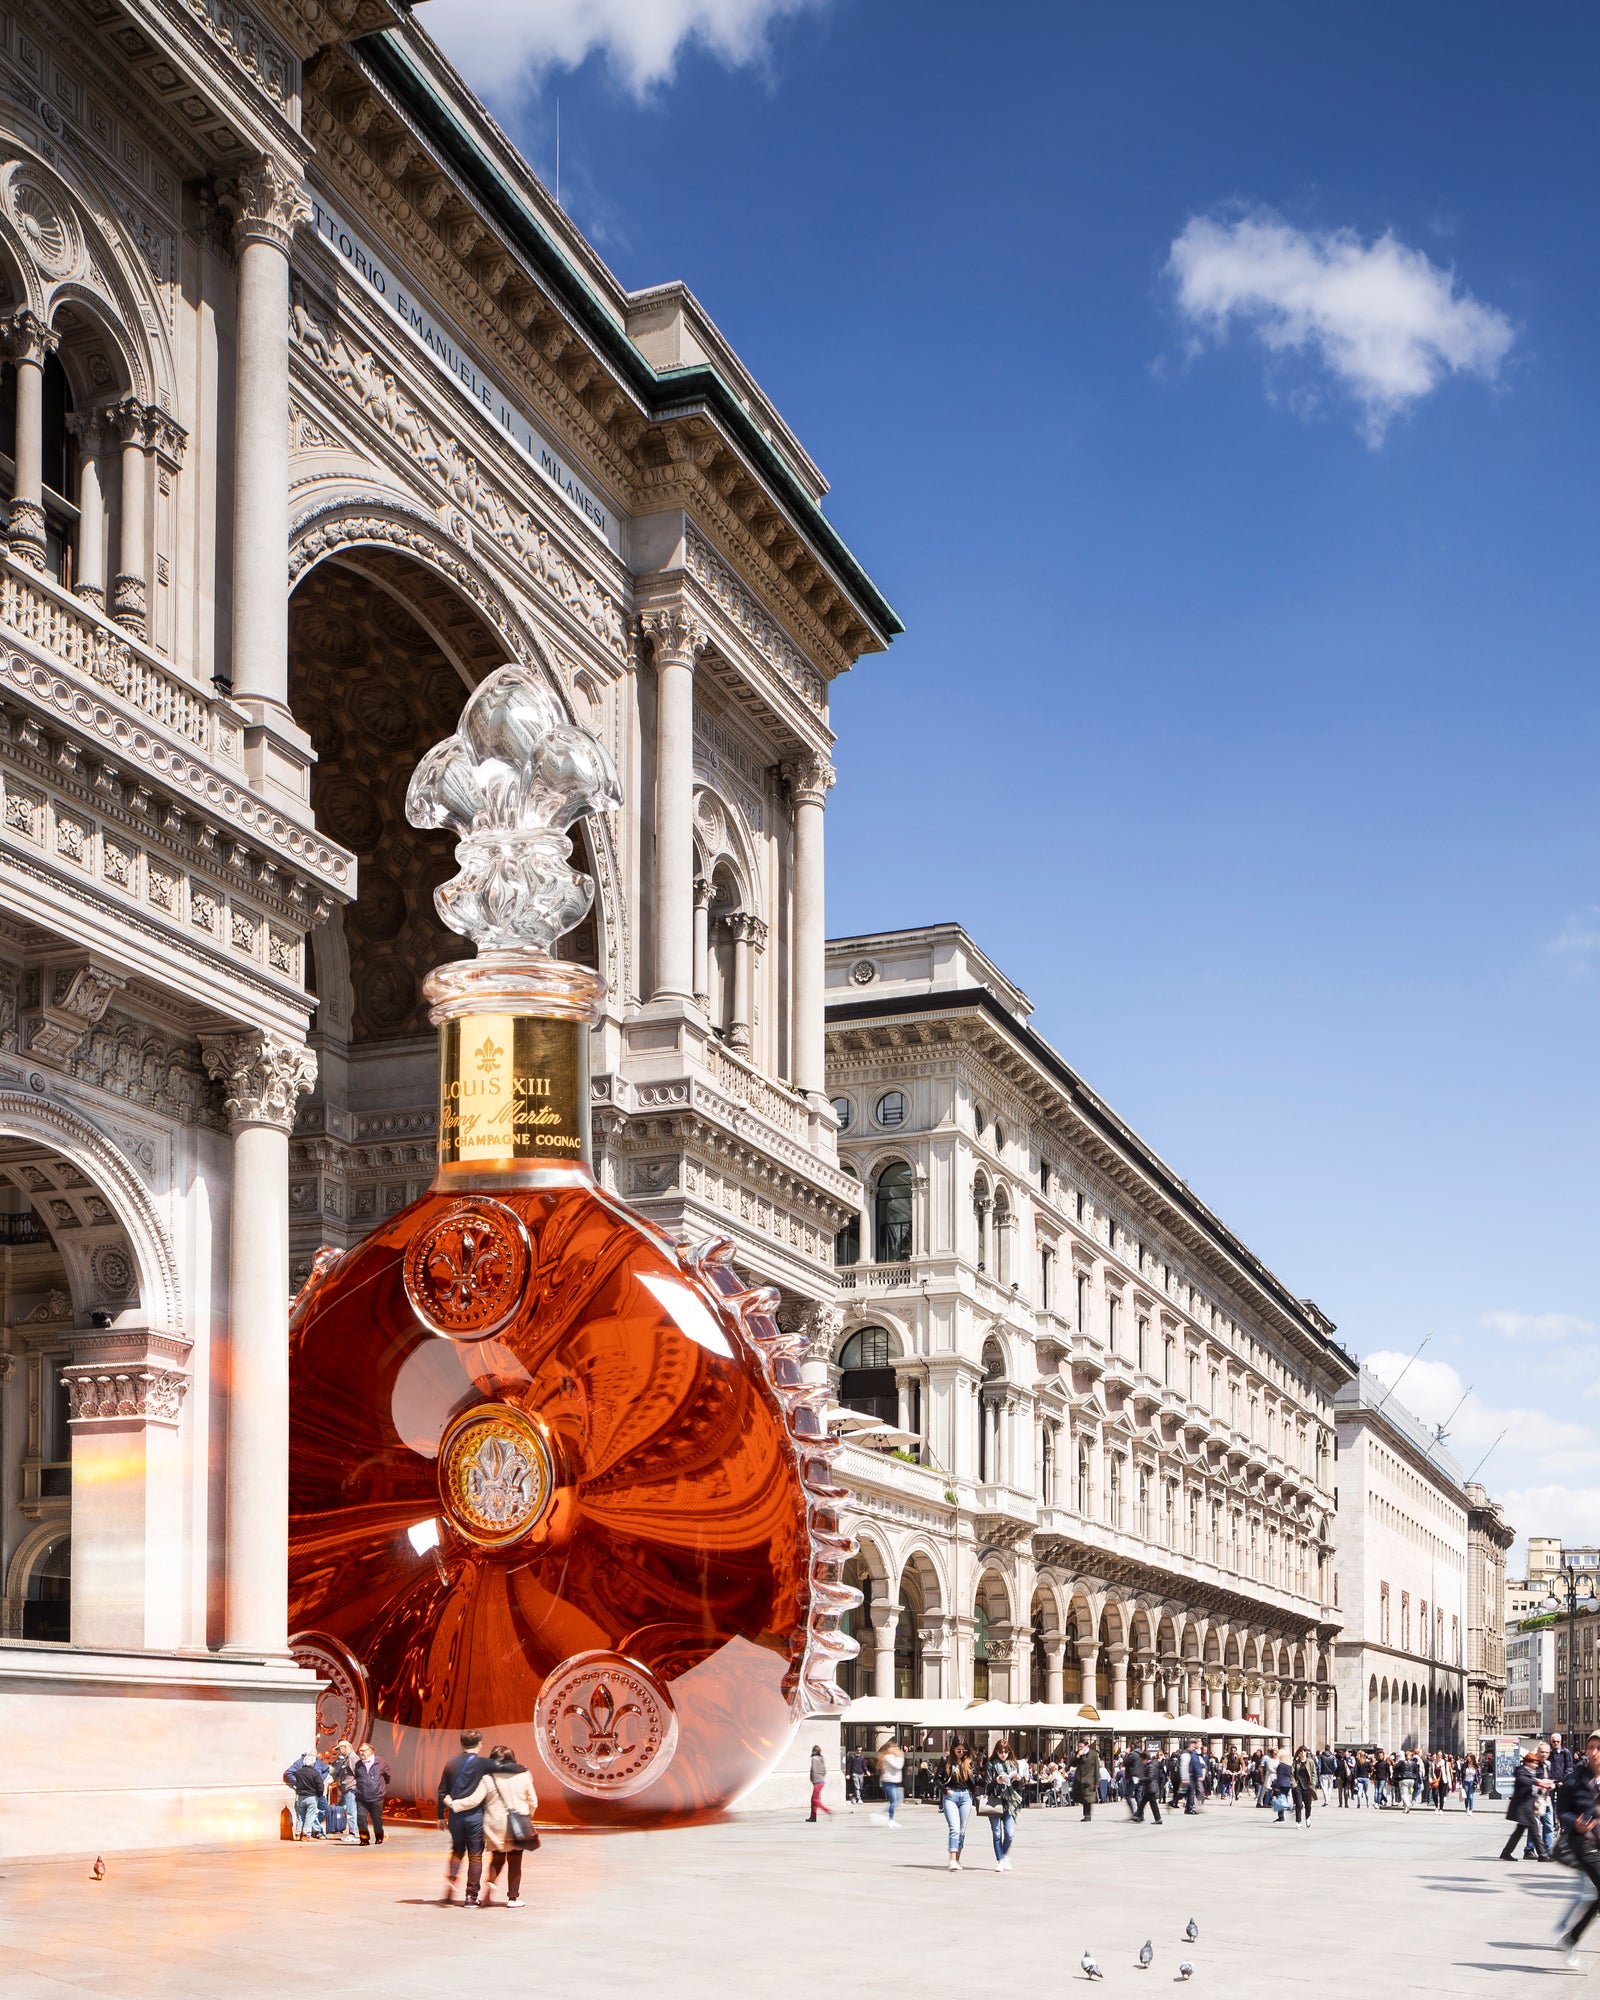 A lifestyle photo of LOUIS XIII decanter among buildings of Milan